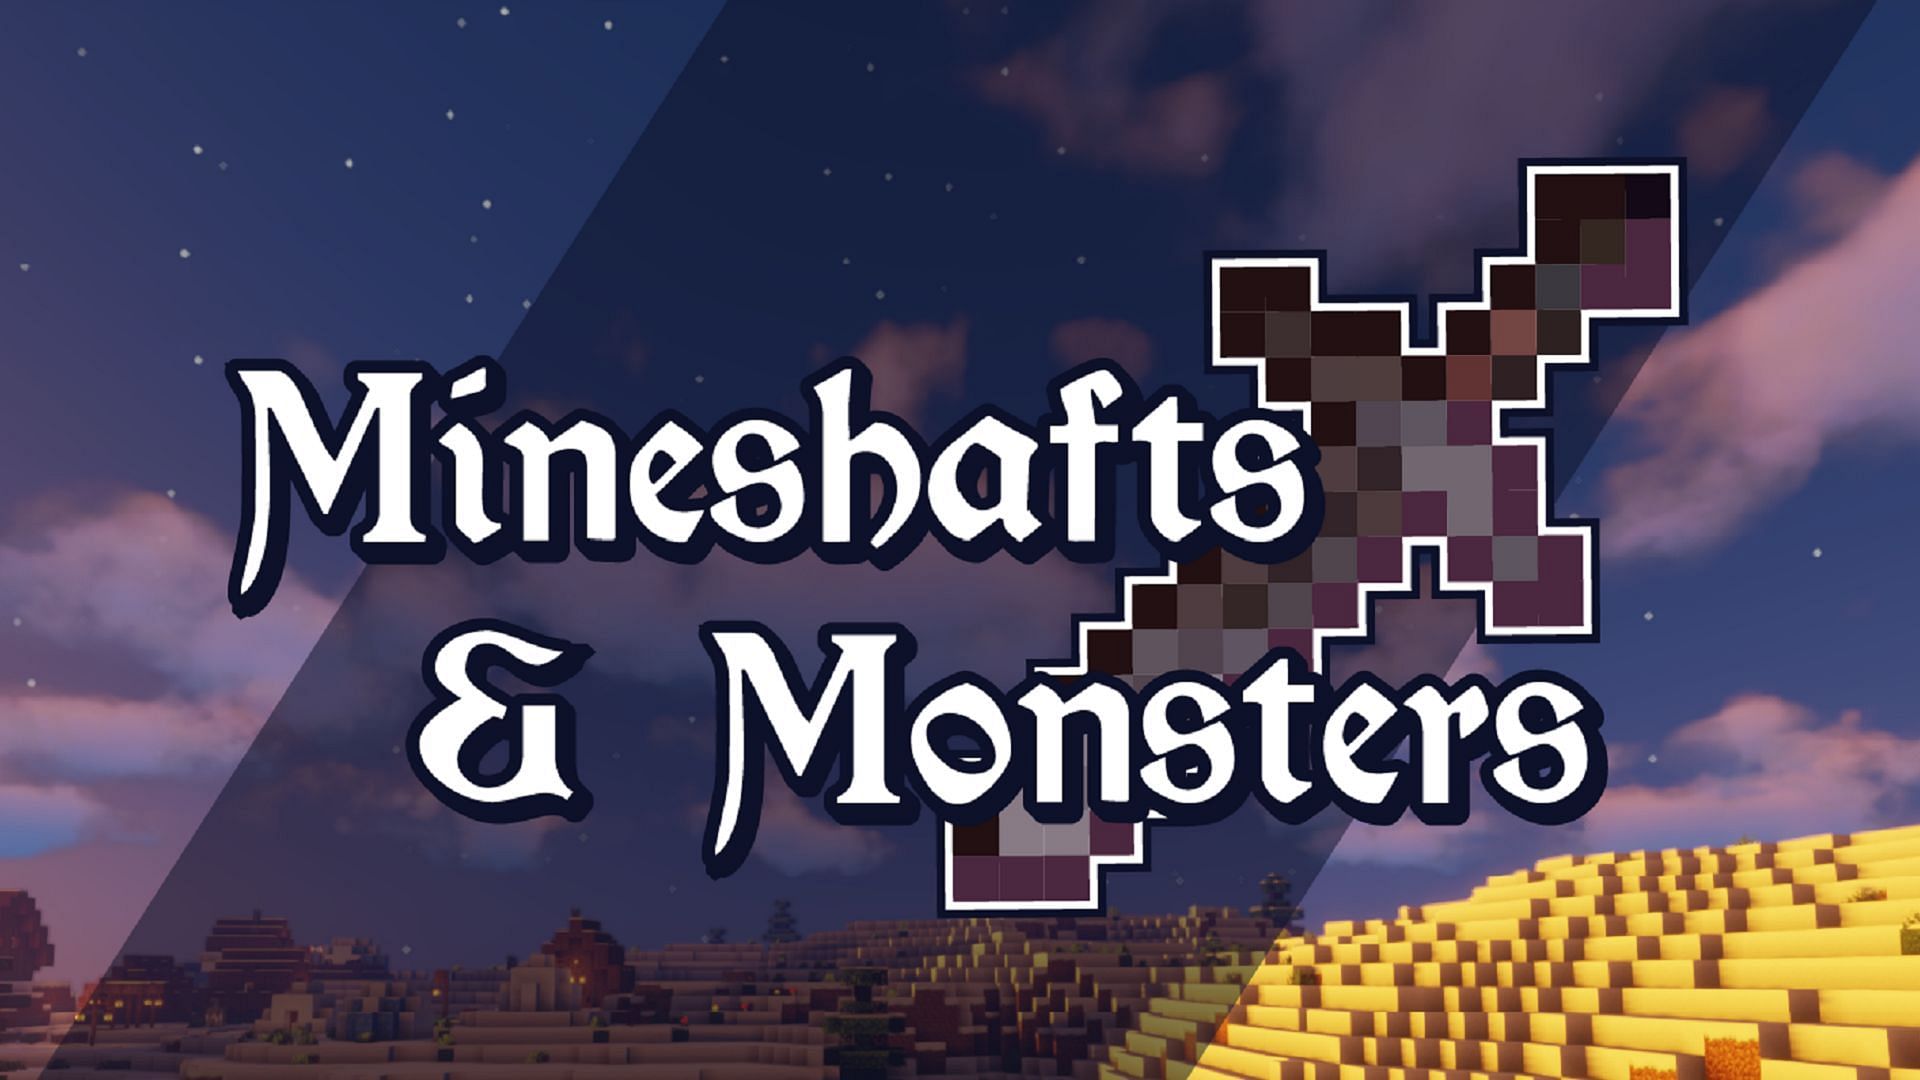 Mineshafts &amp; Monsters is a magnificent medieval fantasy RPG setting with a great story (Image via Bstylia14/CurseForge)